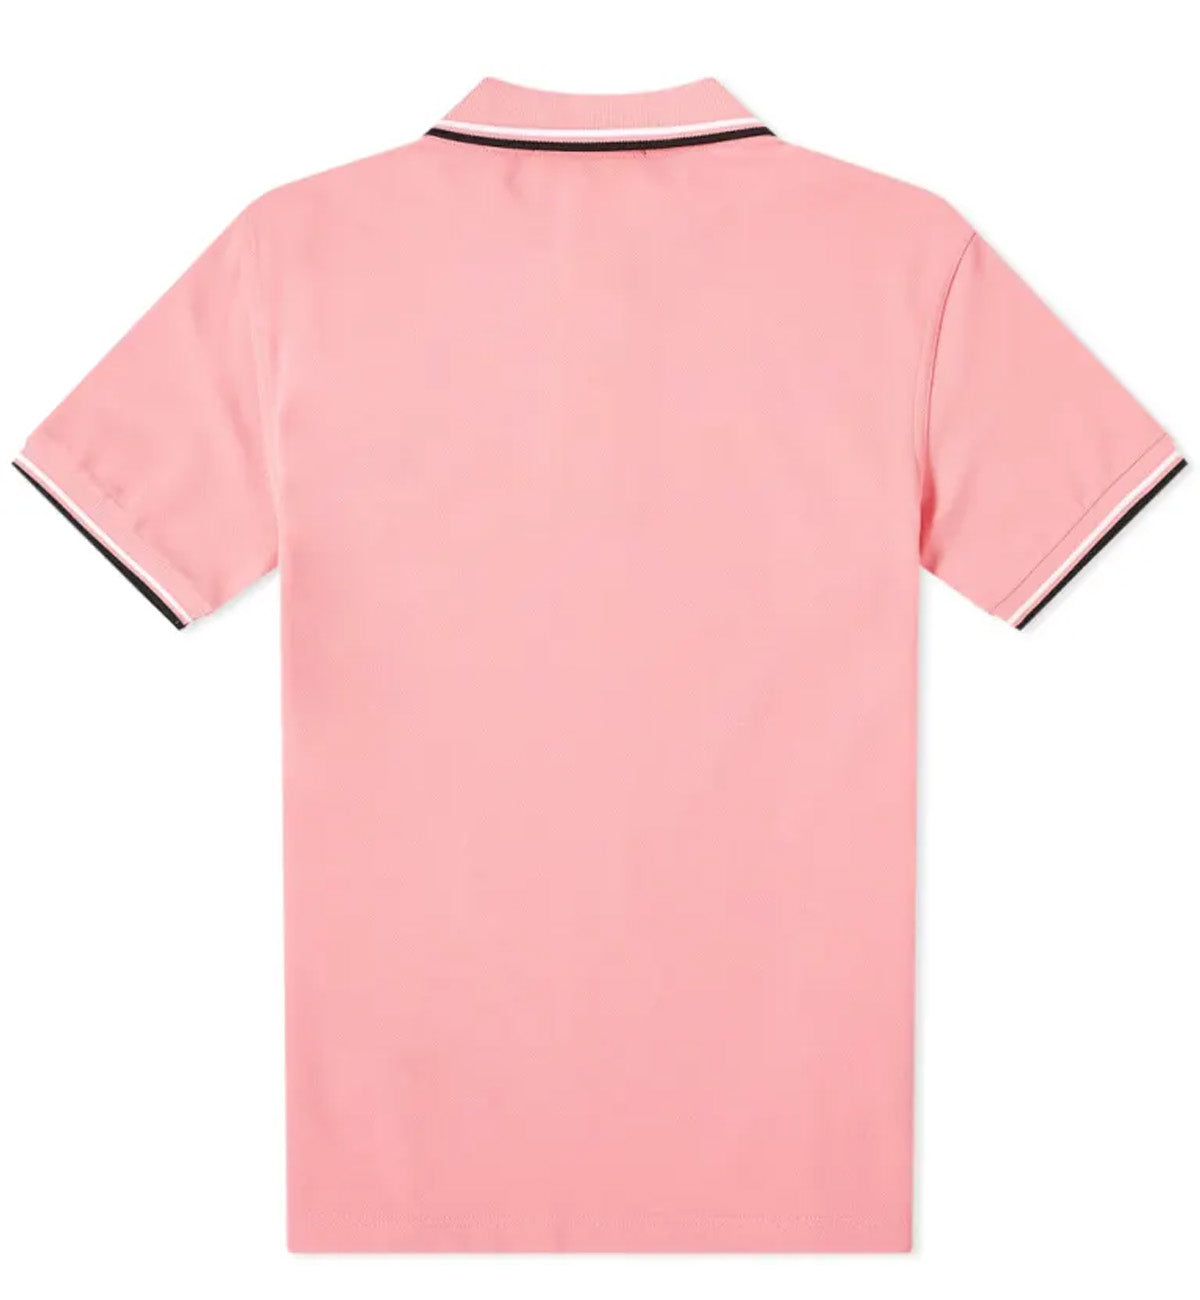 Fred Perry Black White Twin Tipped Pink Polo Shirt